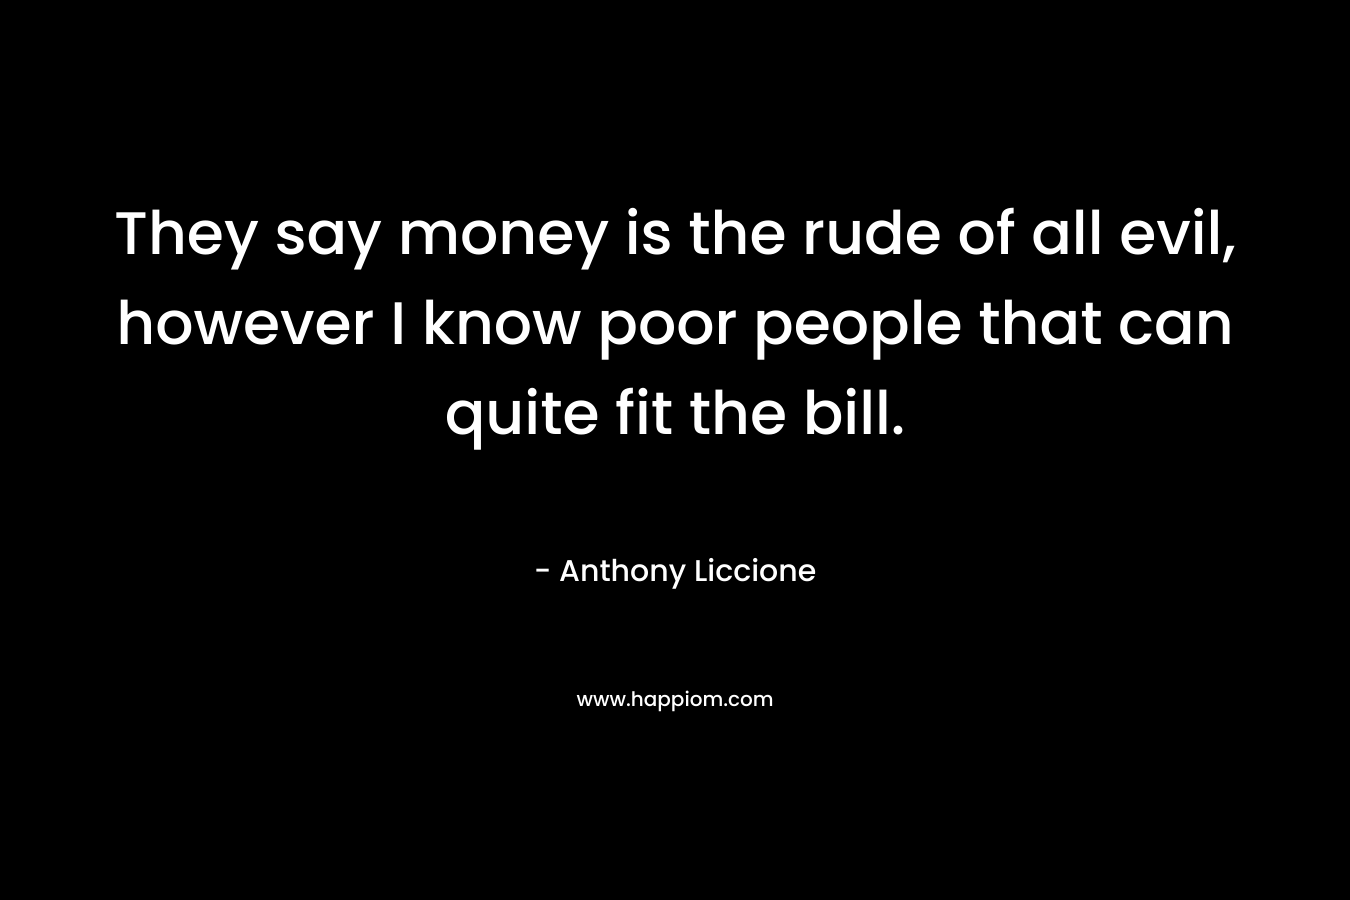 They say money is the rude of all evil, however I know poor people that can quite fit the bill.